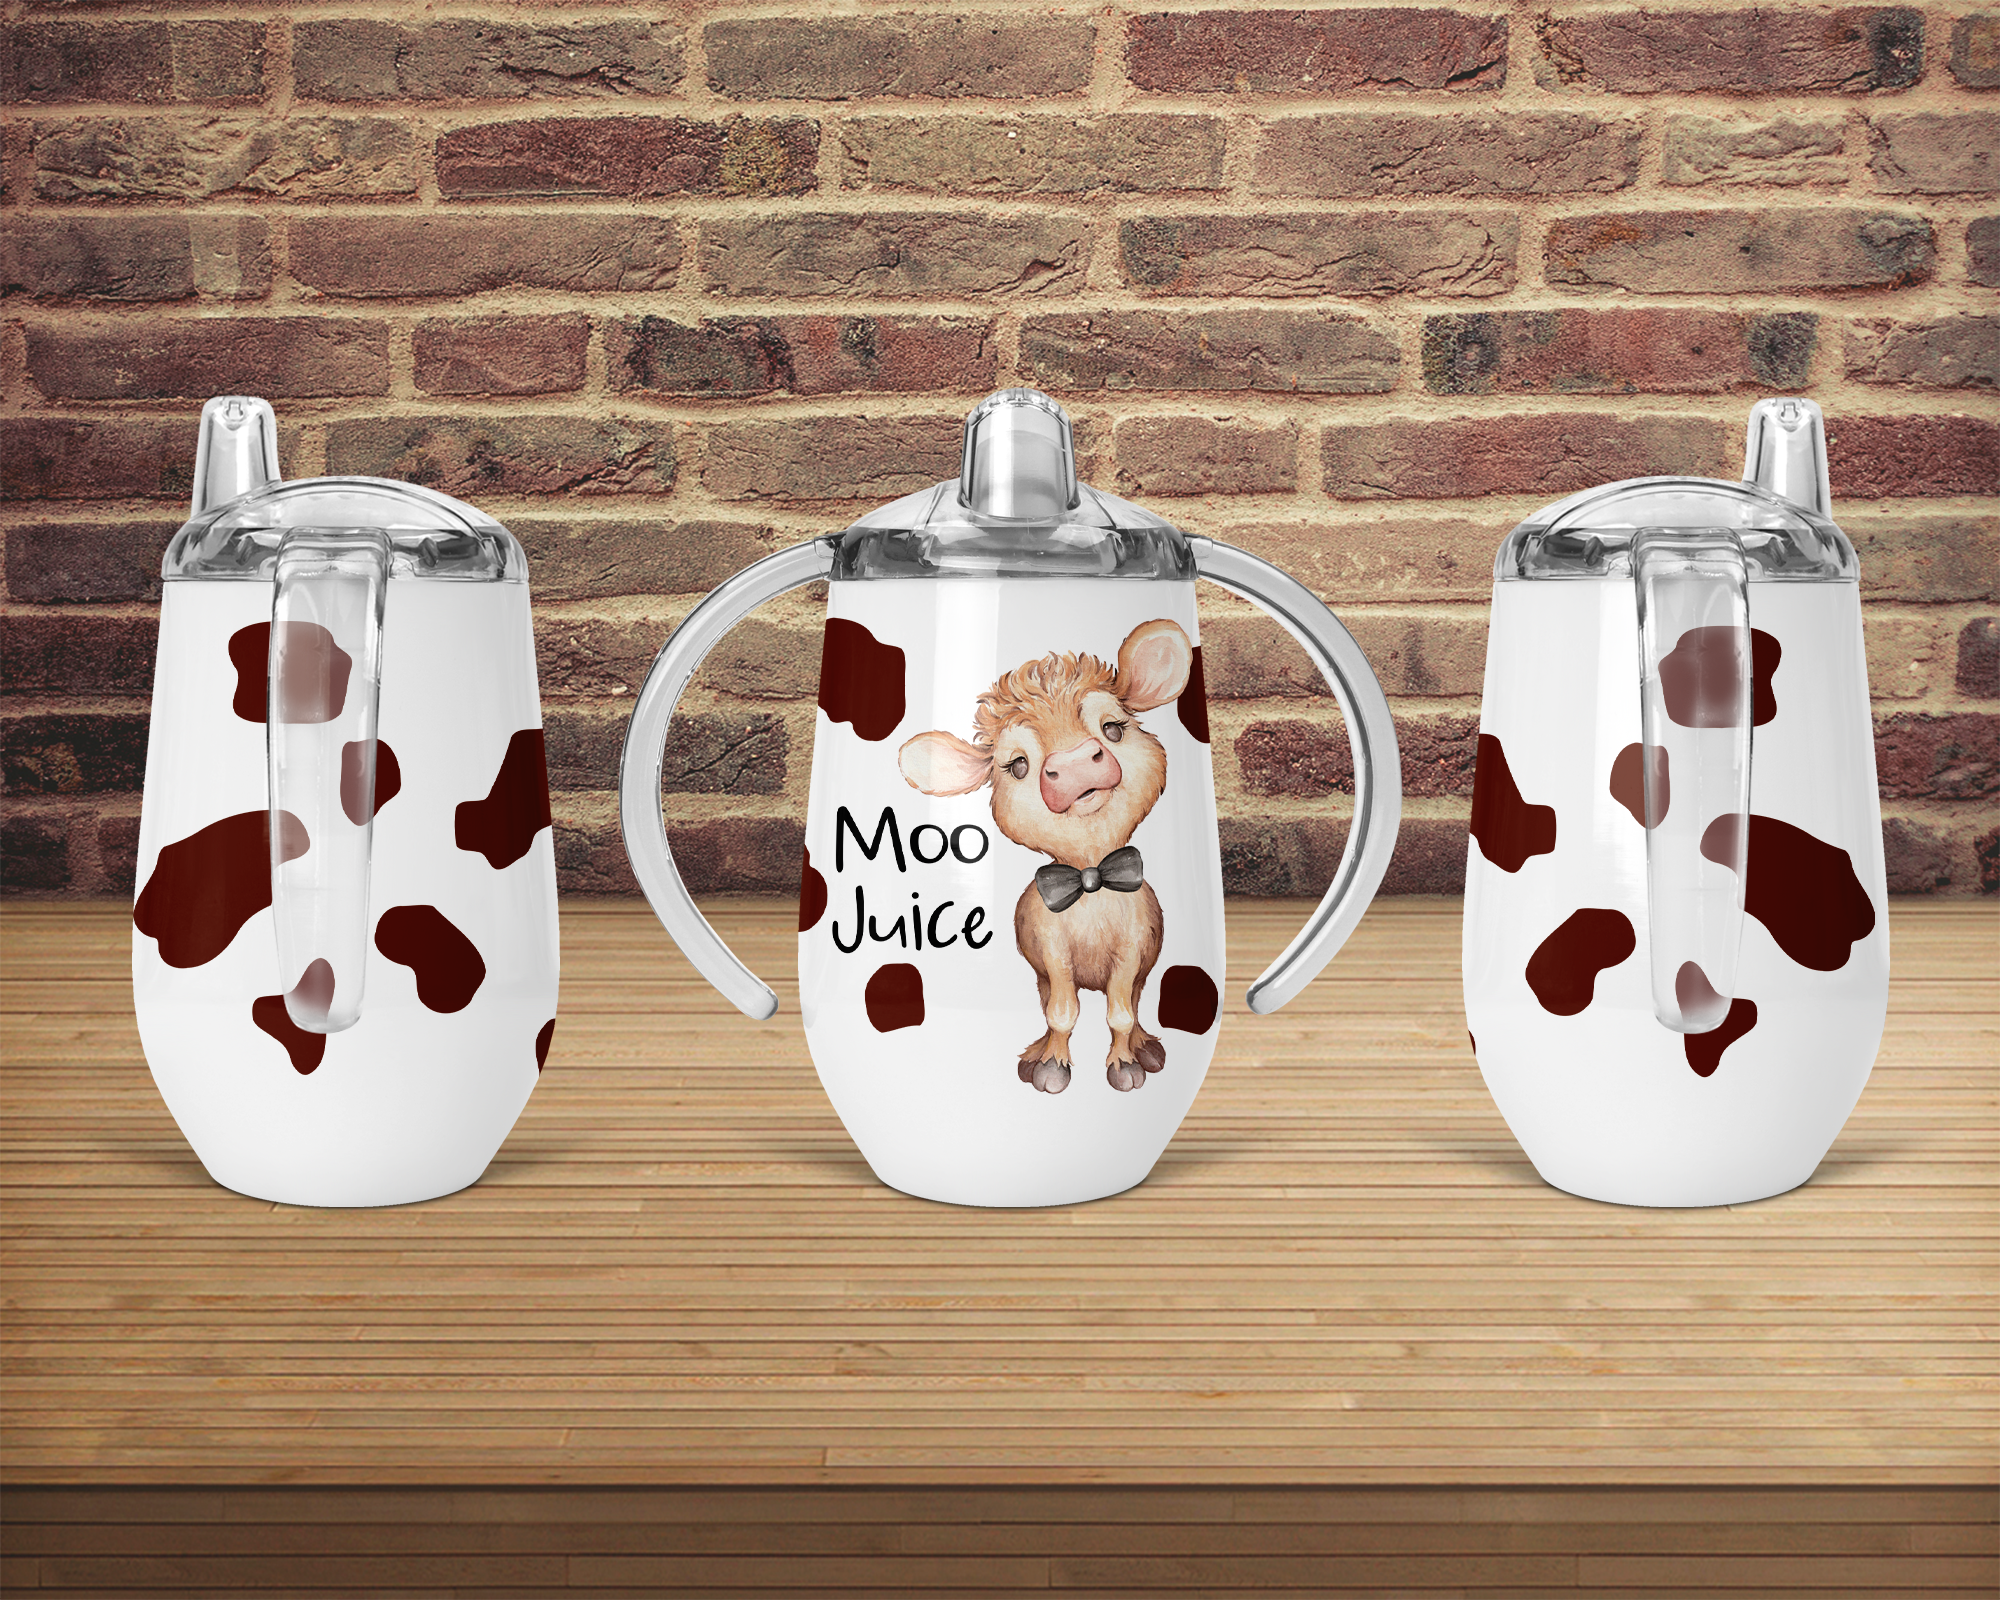 (Instant Print) Digital Download - Moo juice sippy cup Designs , made for our sippy cups